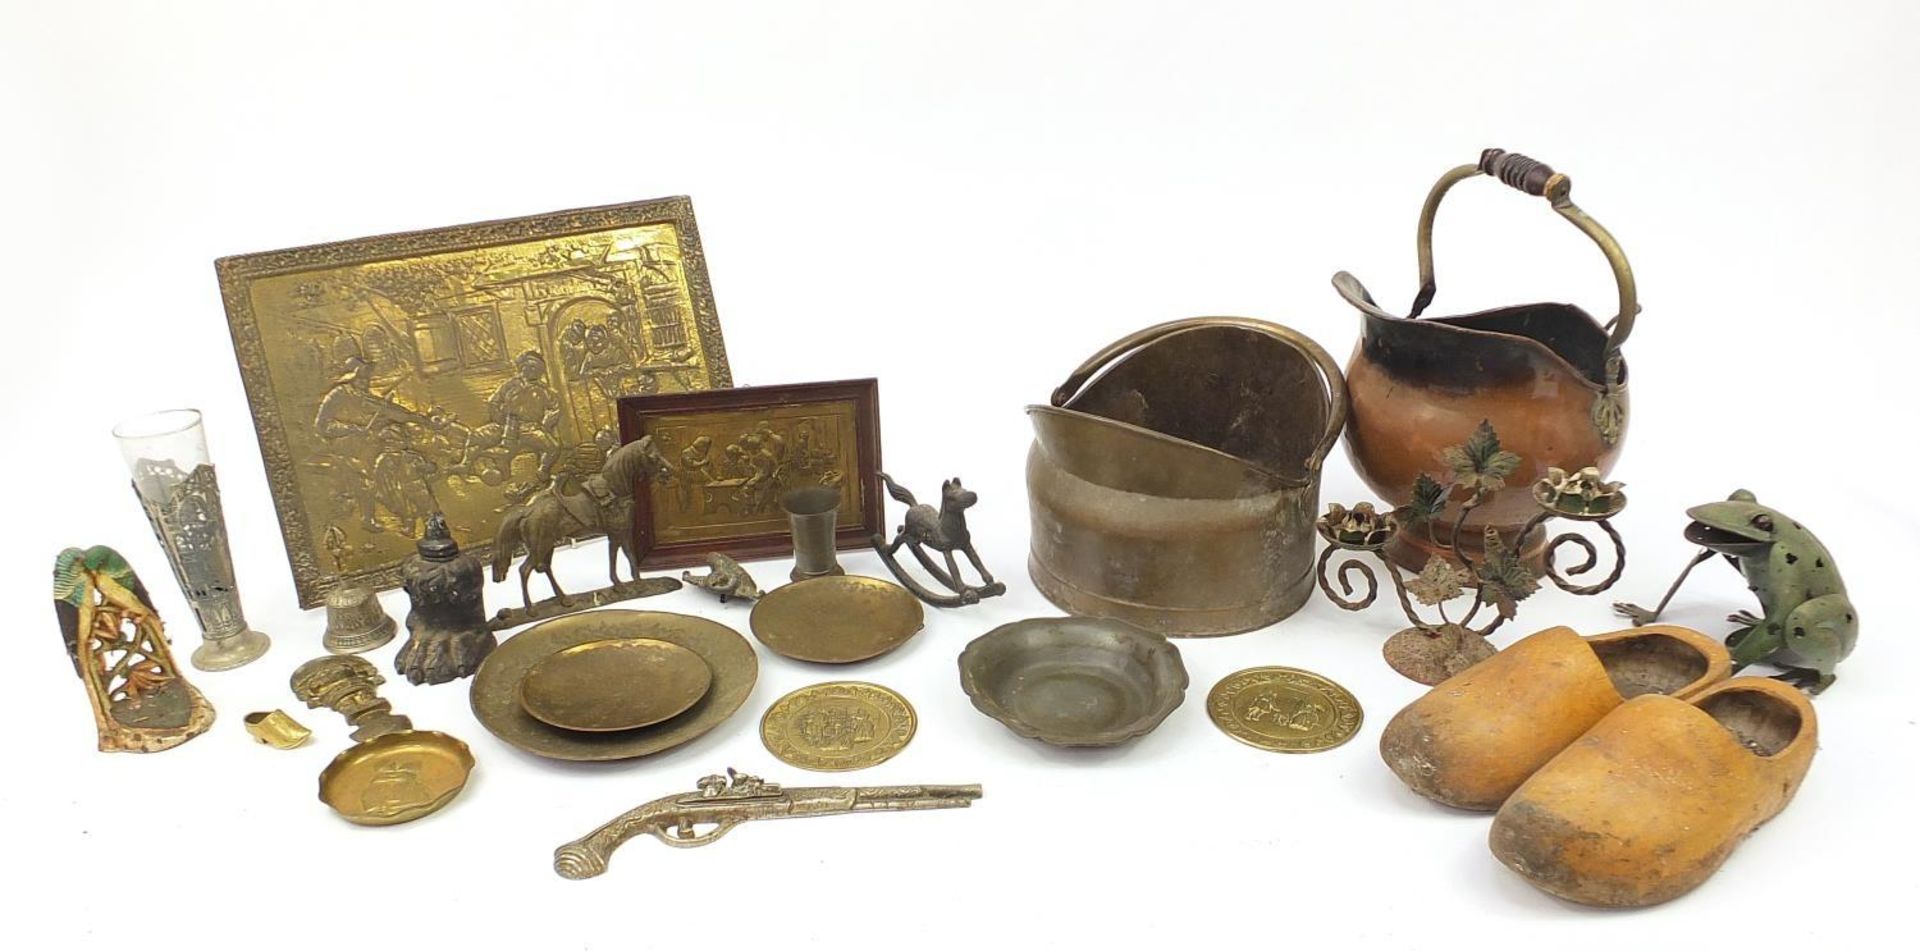 Metalware and wooden ware including a pair of Dutch clogs, embossed tavern plaques and two coal